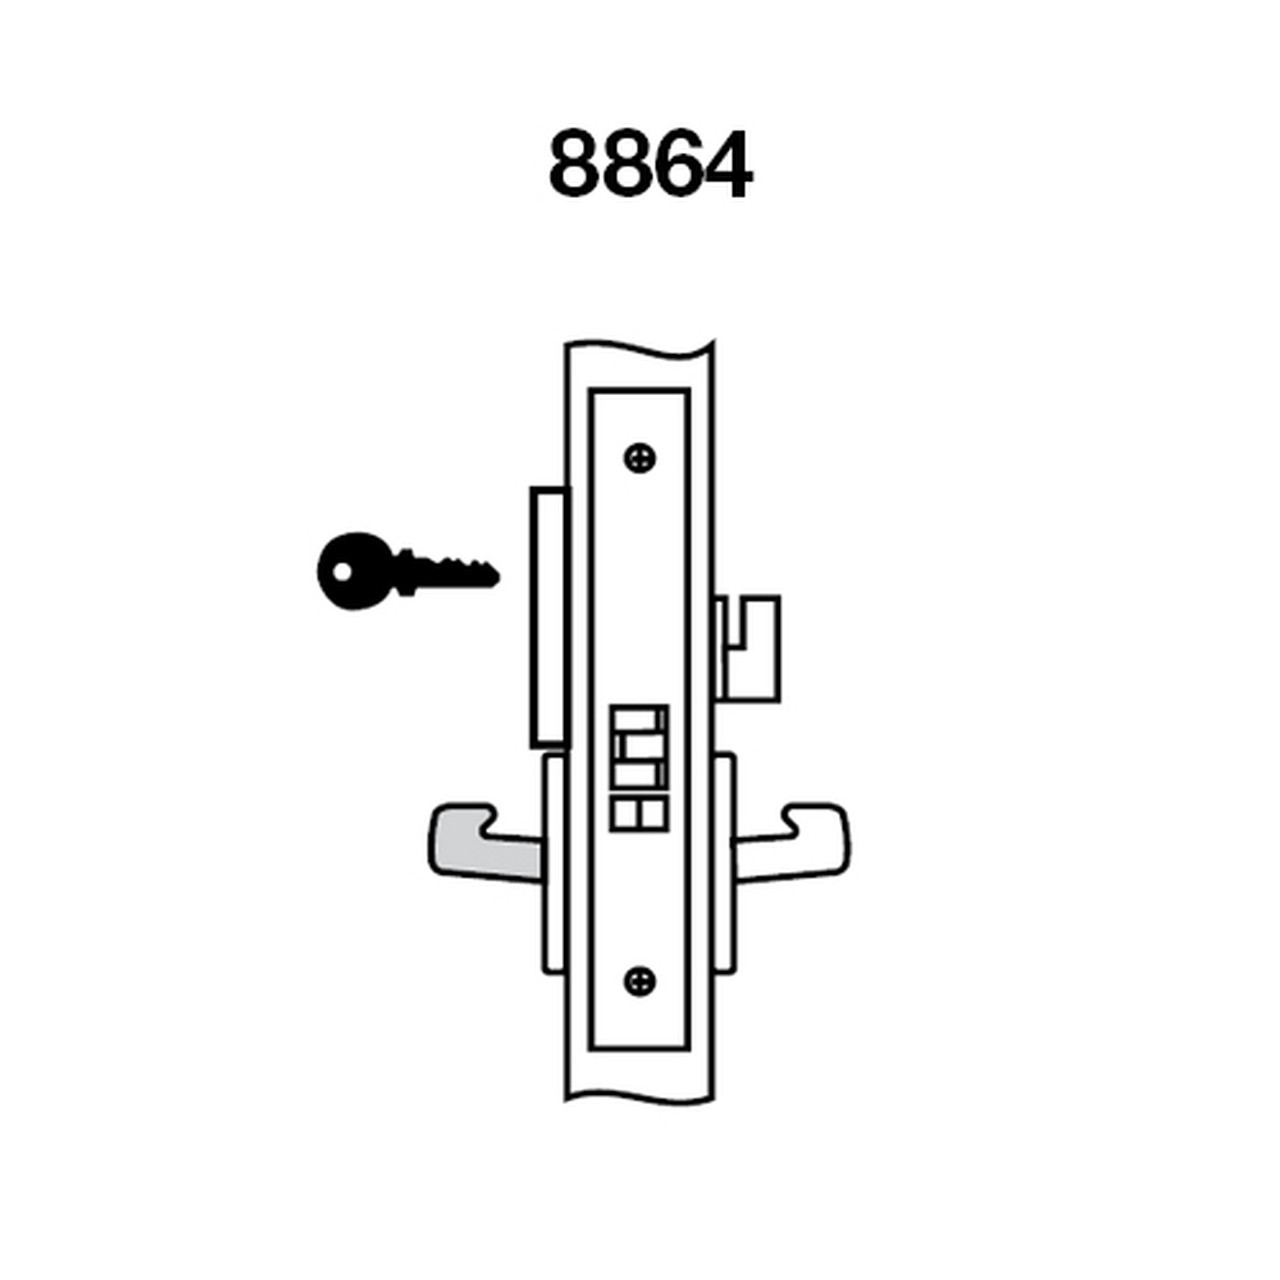 PBR8864FL-613E Yale 8800FL Series Single Cylinder Mortise Bathroom Lock with Indicator with Pacific Beach Lever in Dark Satin Bronze